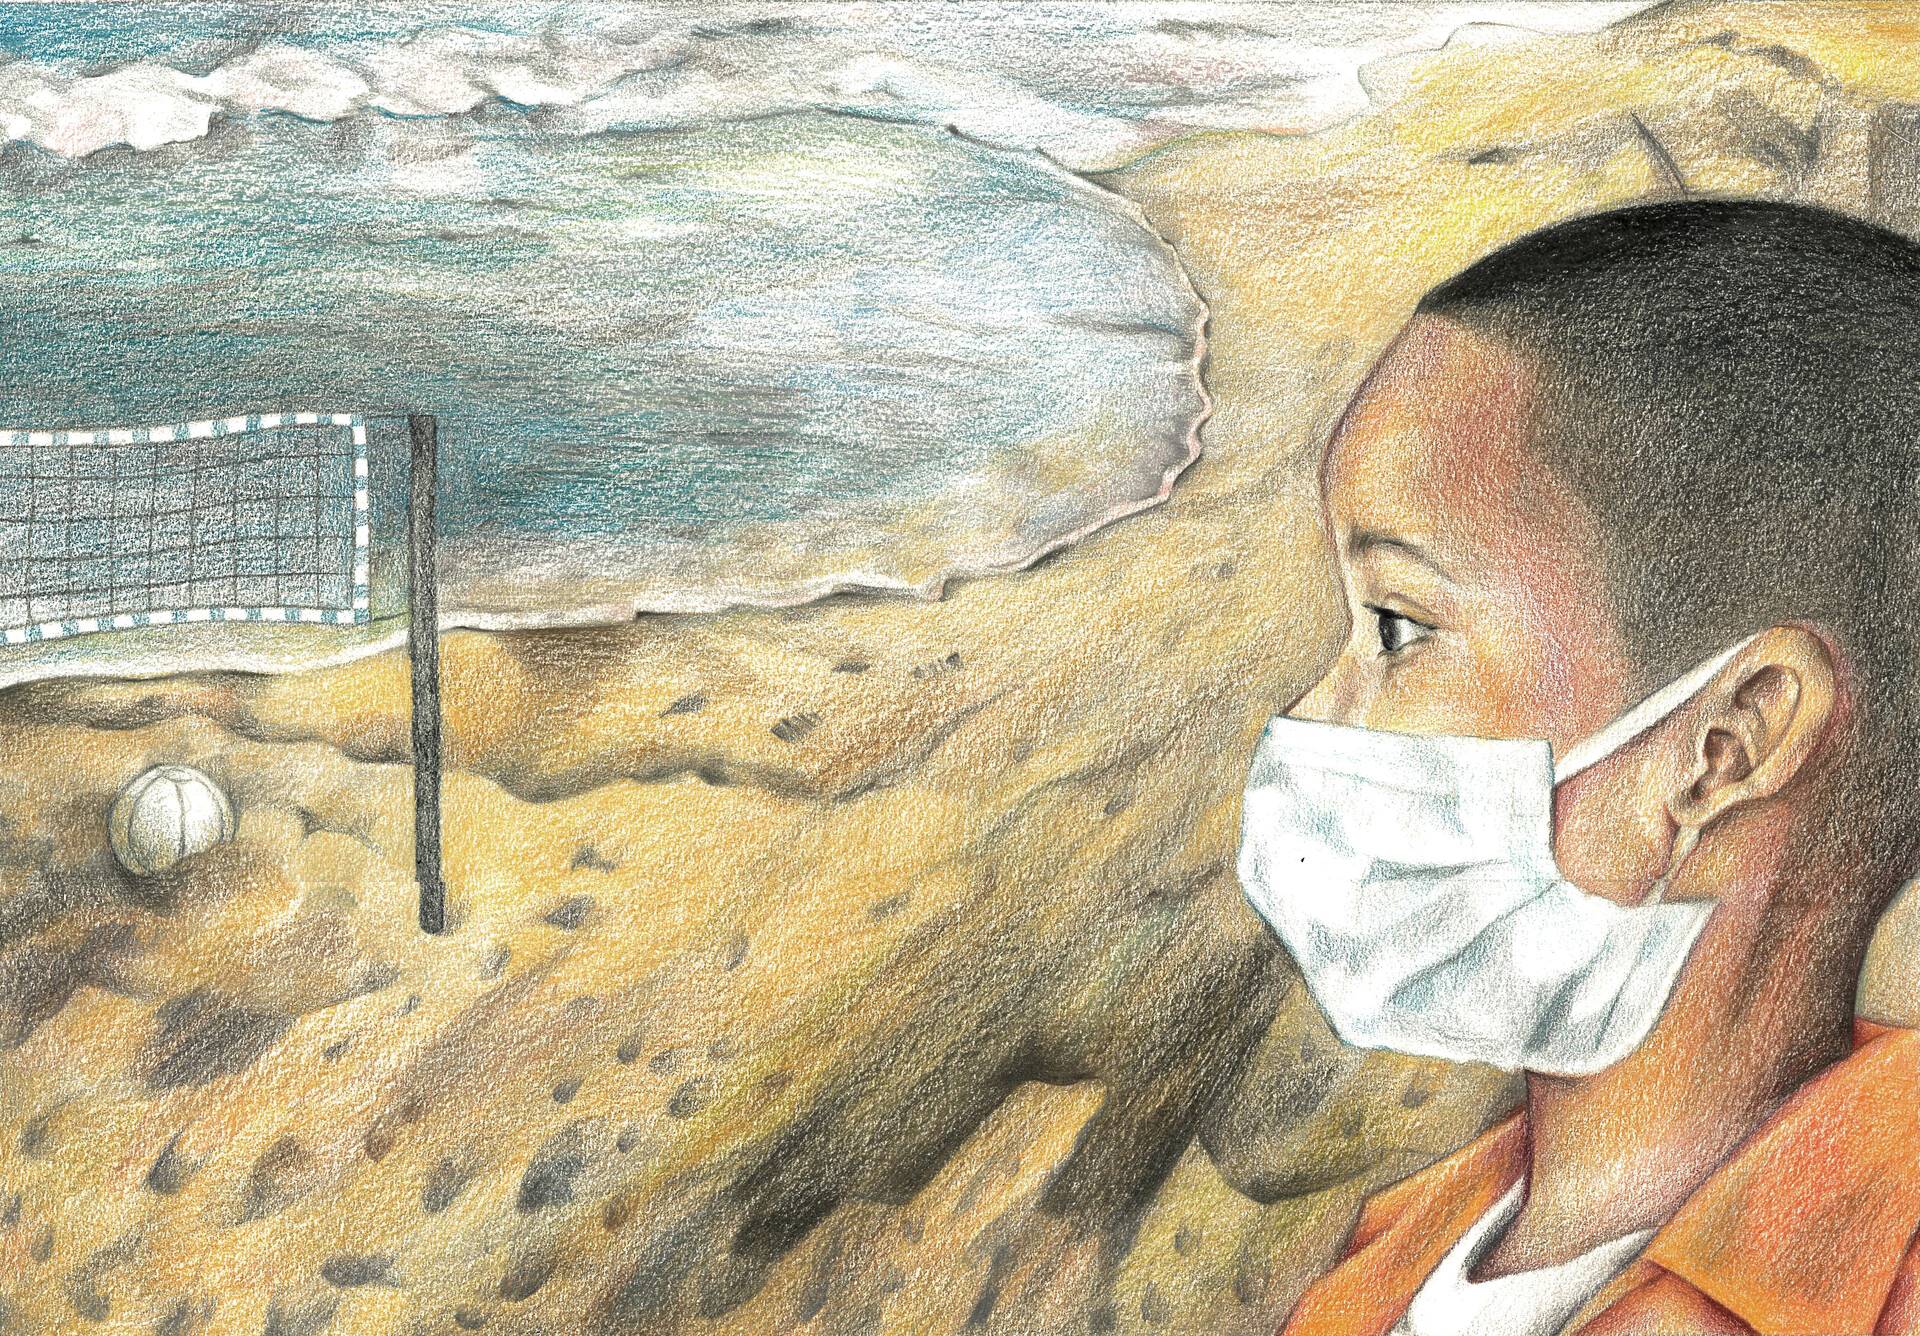 A young child wearing a medical mask looks out at the ocean. On the beach is volleyball net and ball. The sand is covered in oil